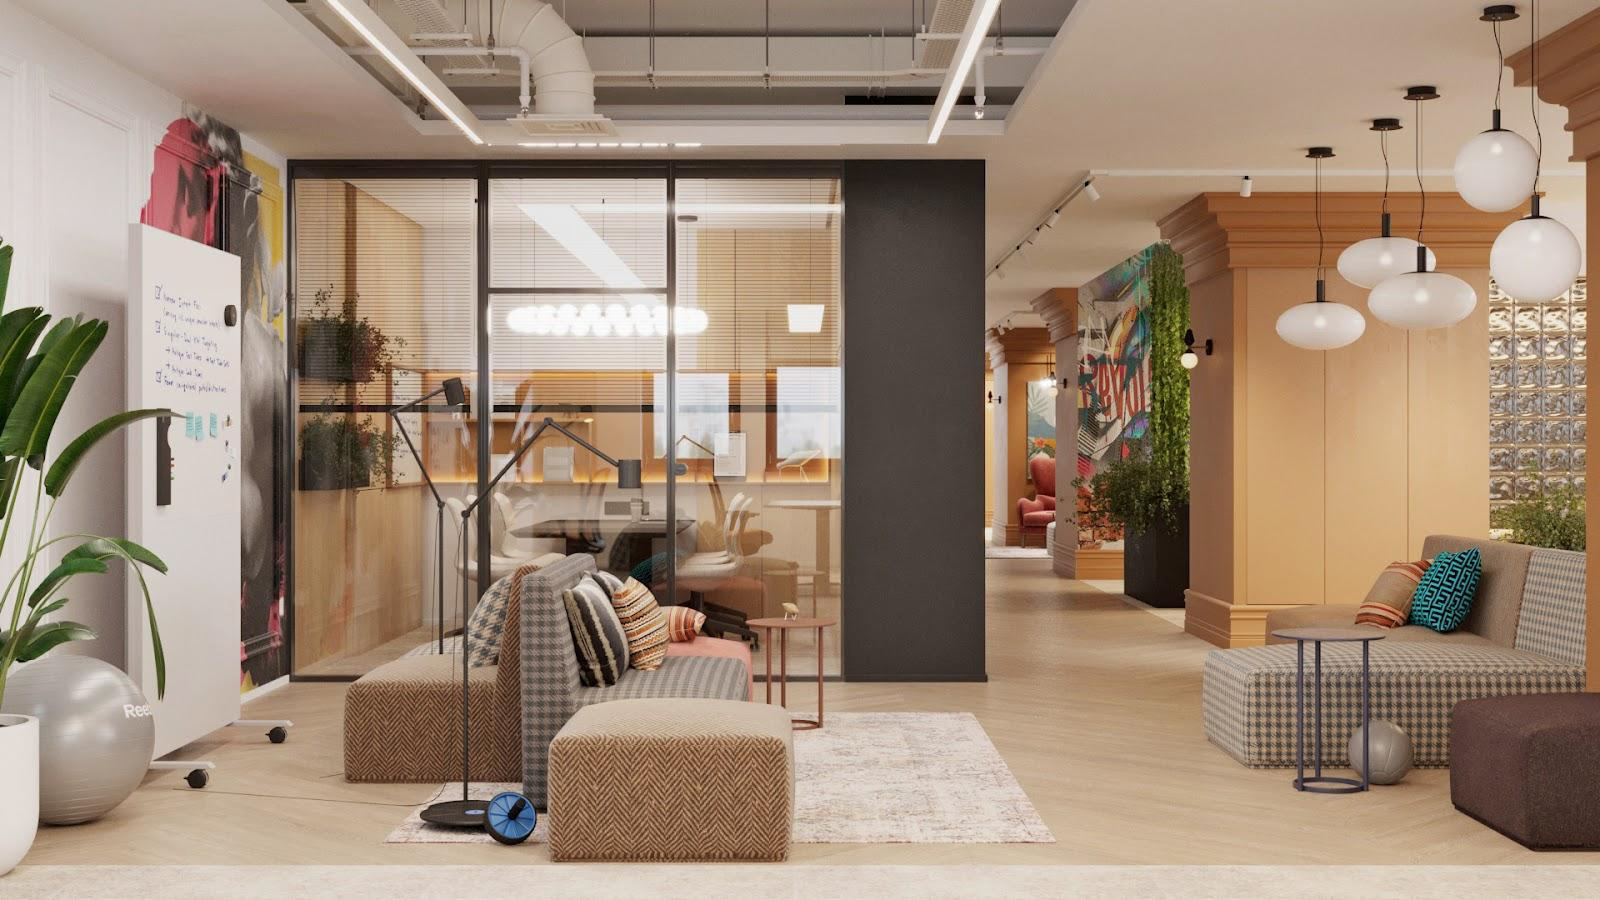 Return to Offices: Trends in Workplace Interior Design 10